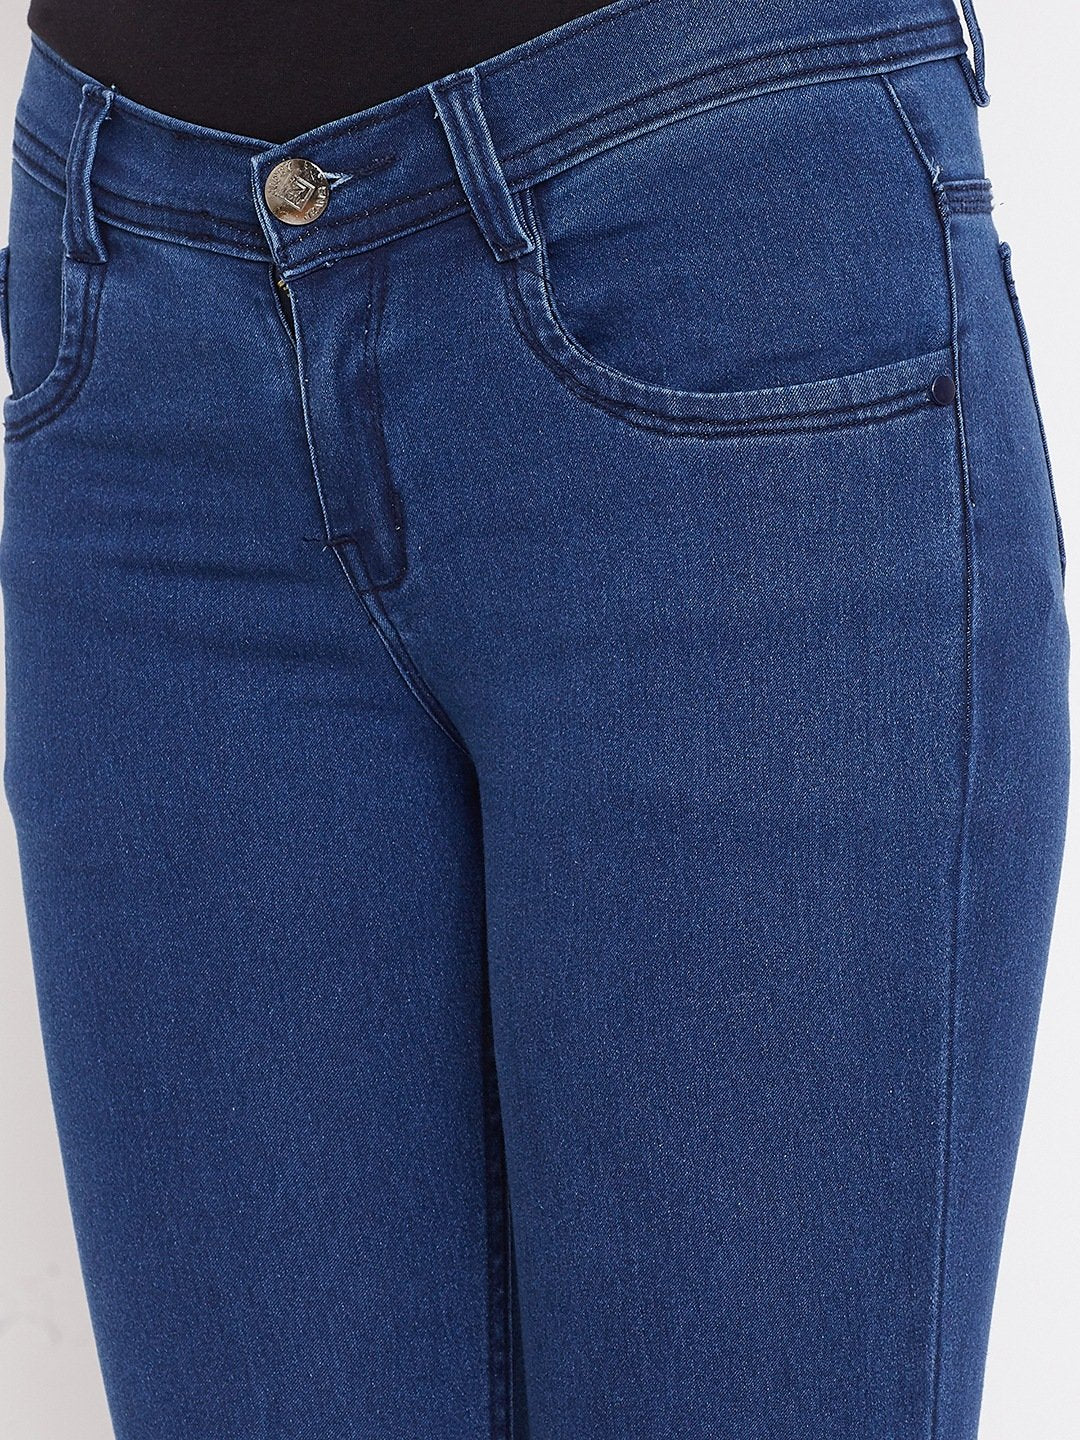 Slim Fit Stretchable Bata Blue Jeans - NiftyJeans